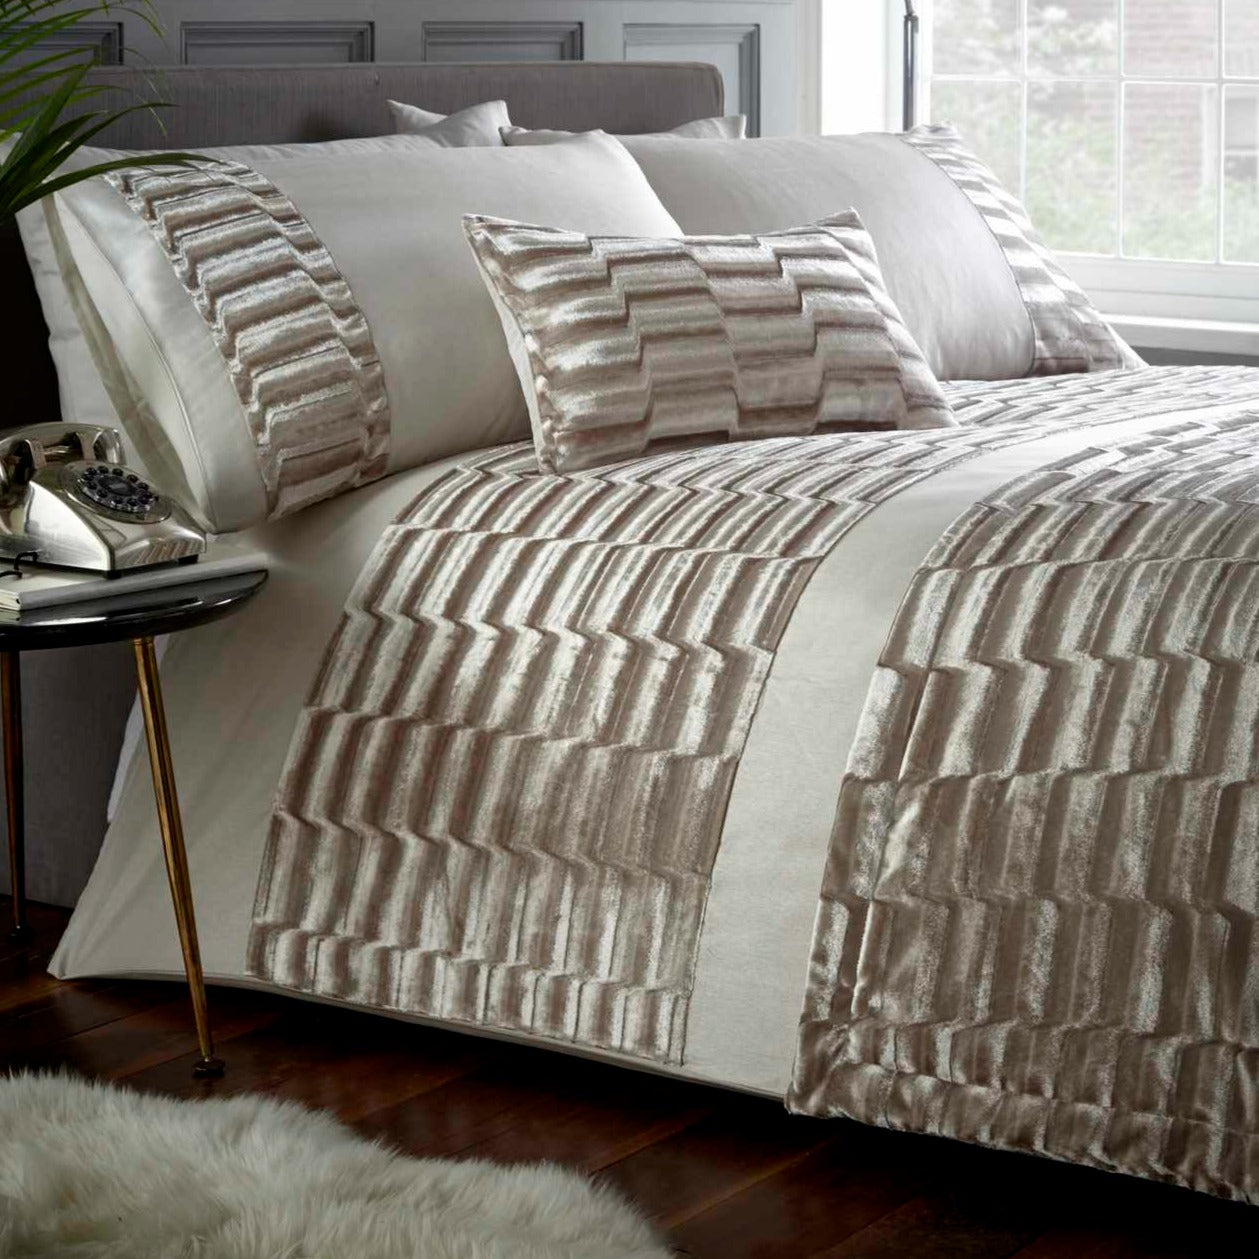 oyster cream fabric highlighted by a plush velvet band across the duvet and down each pillowcase